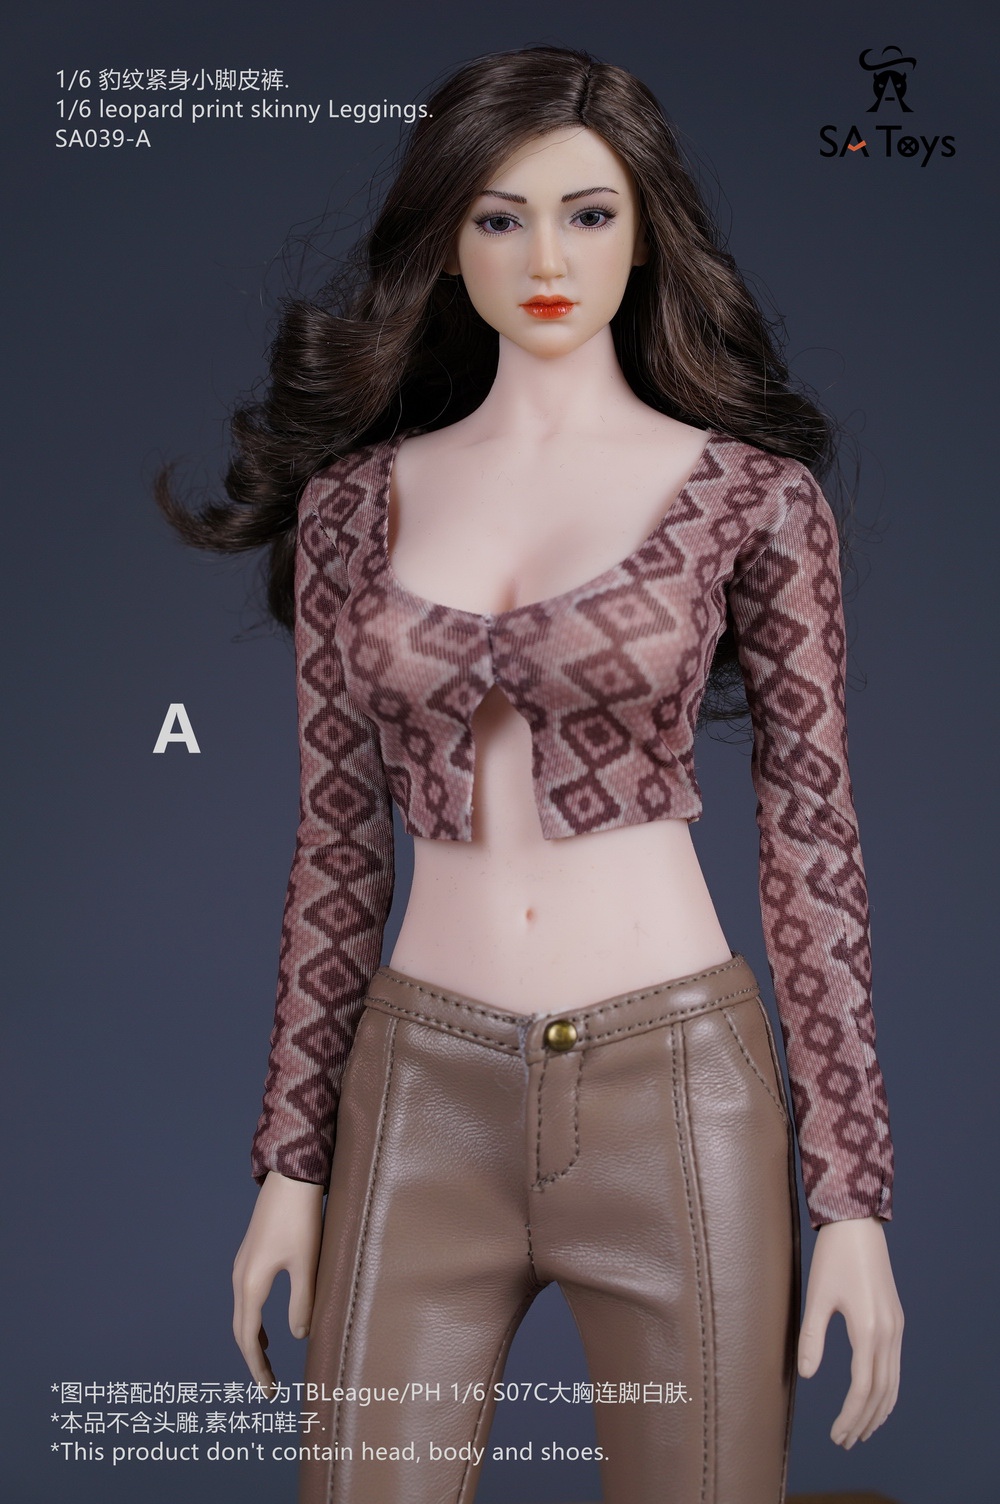 Female - NEW PRODUCT: SA Toys: 1/6 Lantern Sleeve Leather Pants, Leopard Printed Leather Pants, Printed Backless Dresses (Multiple Options) 10584812